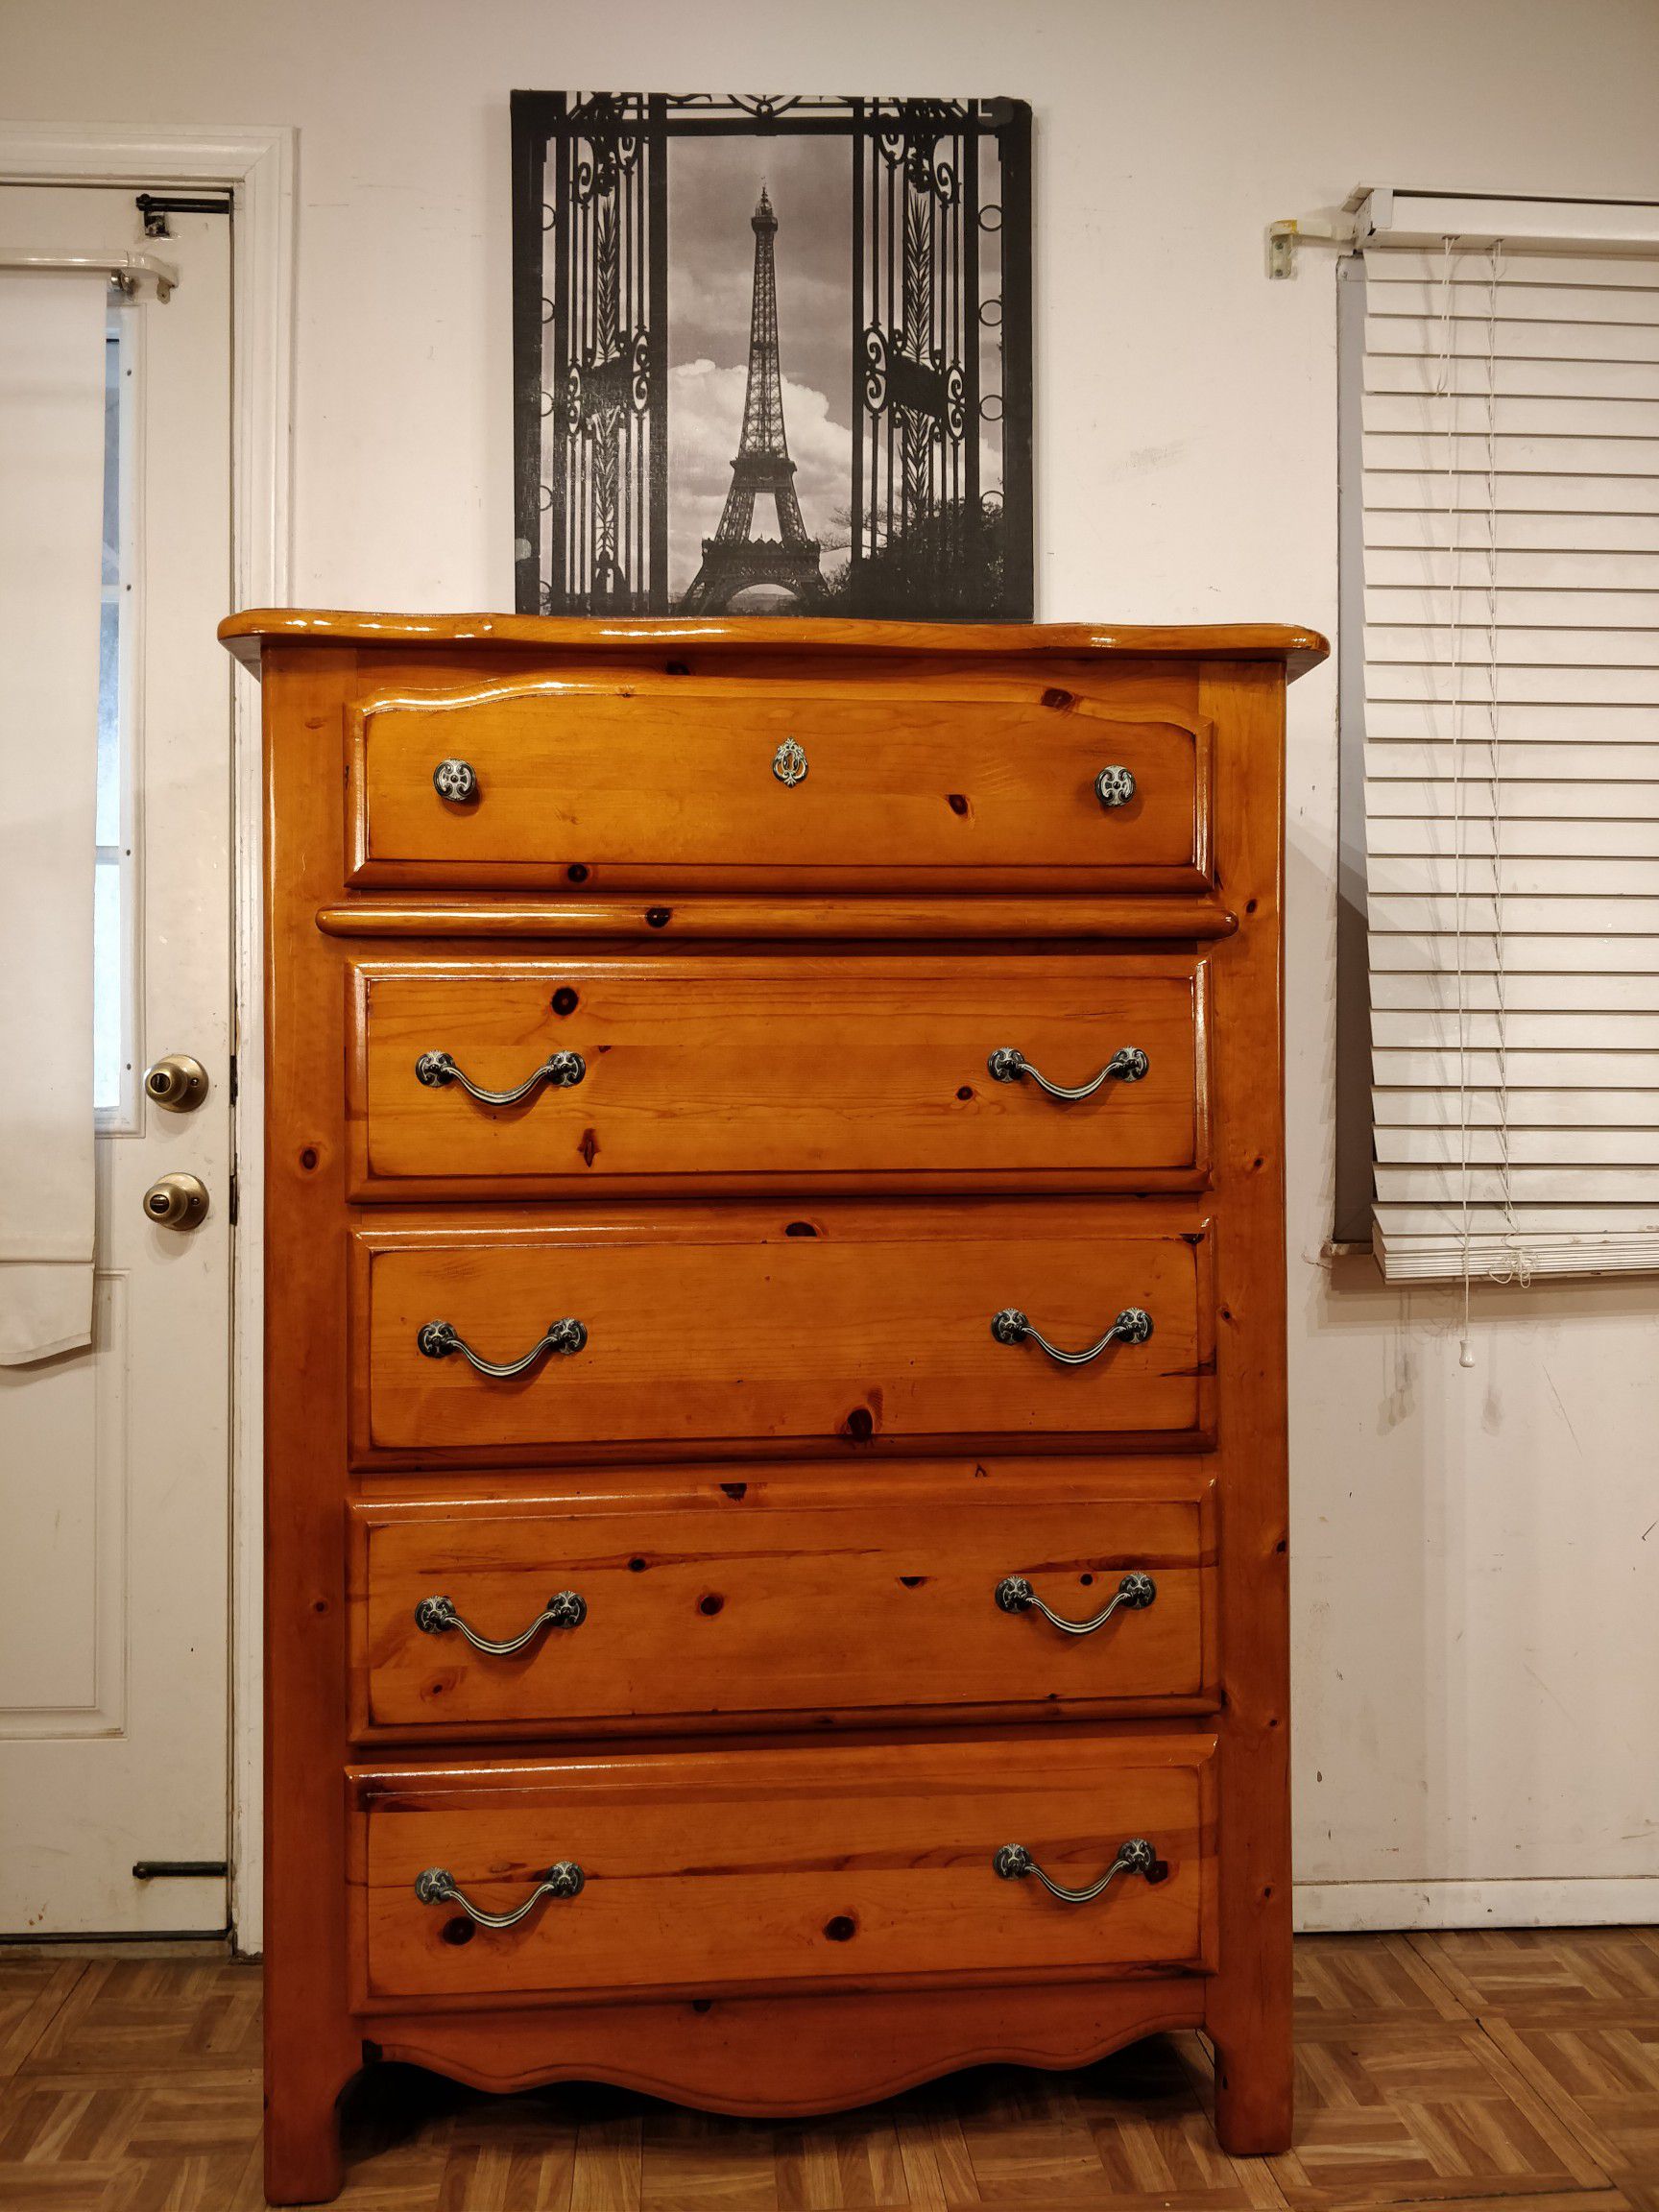 Solid wood big chest dresser with big drawers in great condition all drawers working well, dovetail drawers. L40"*W19"*H56"